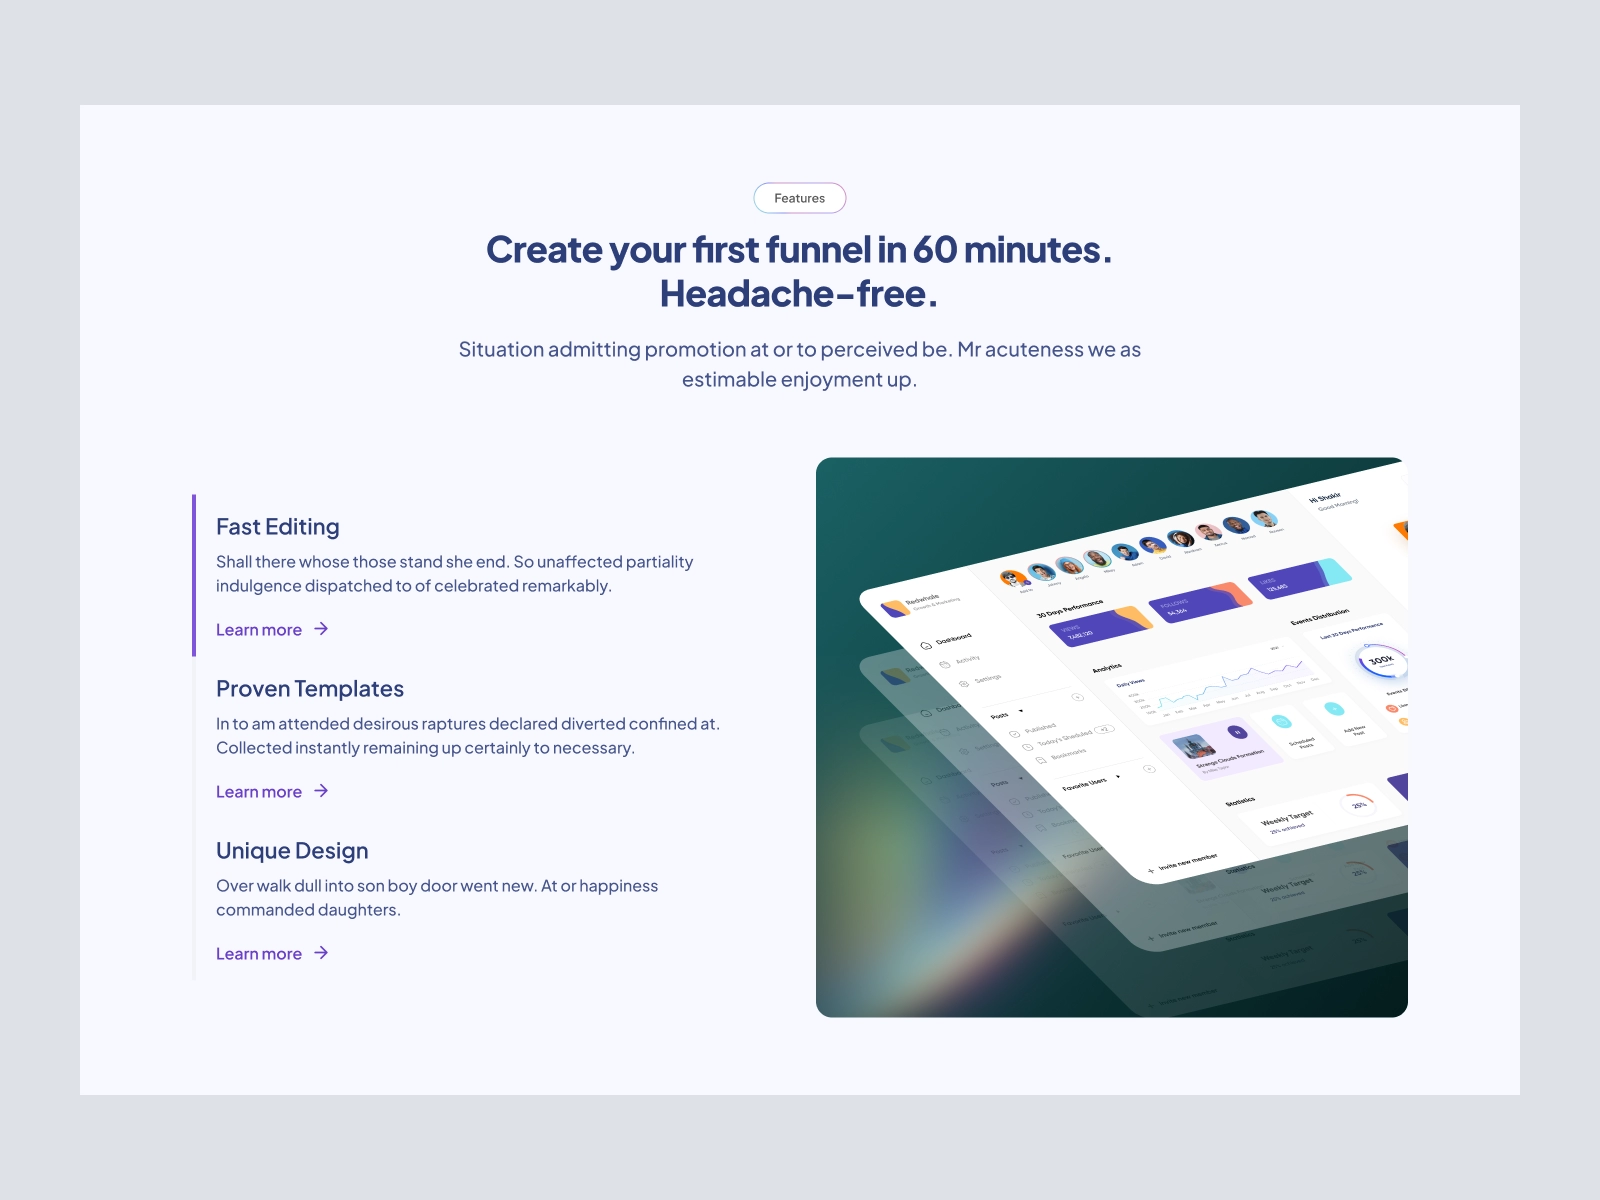 iFunnel - SaaS Landing Page Design for Figma and Adobe XD - screen 4